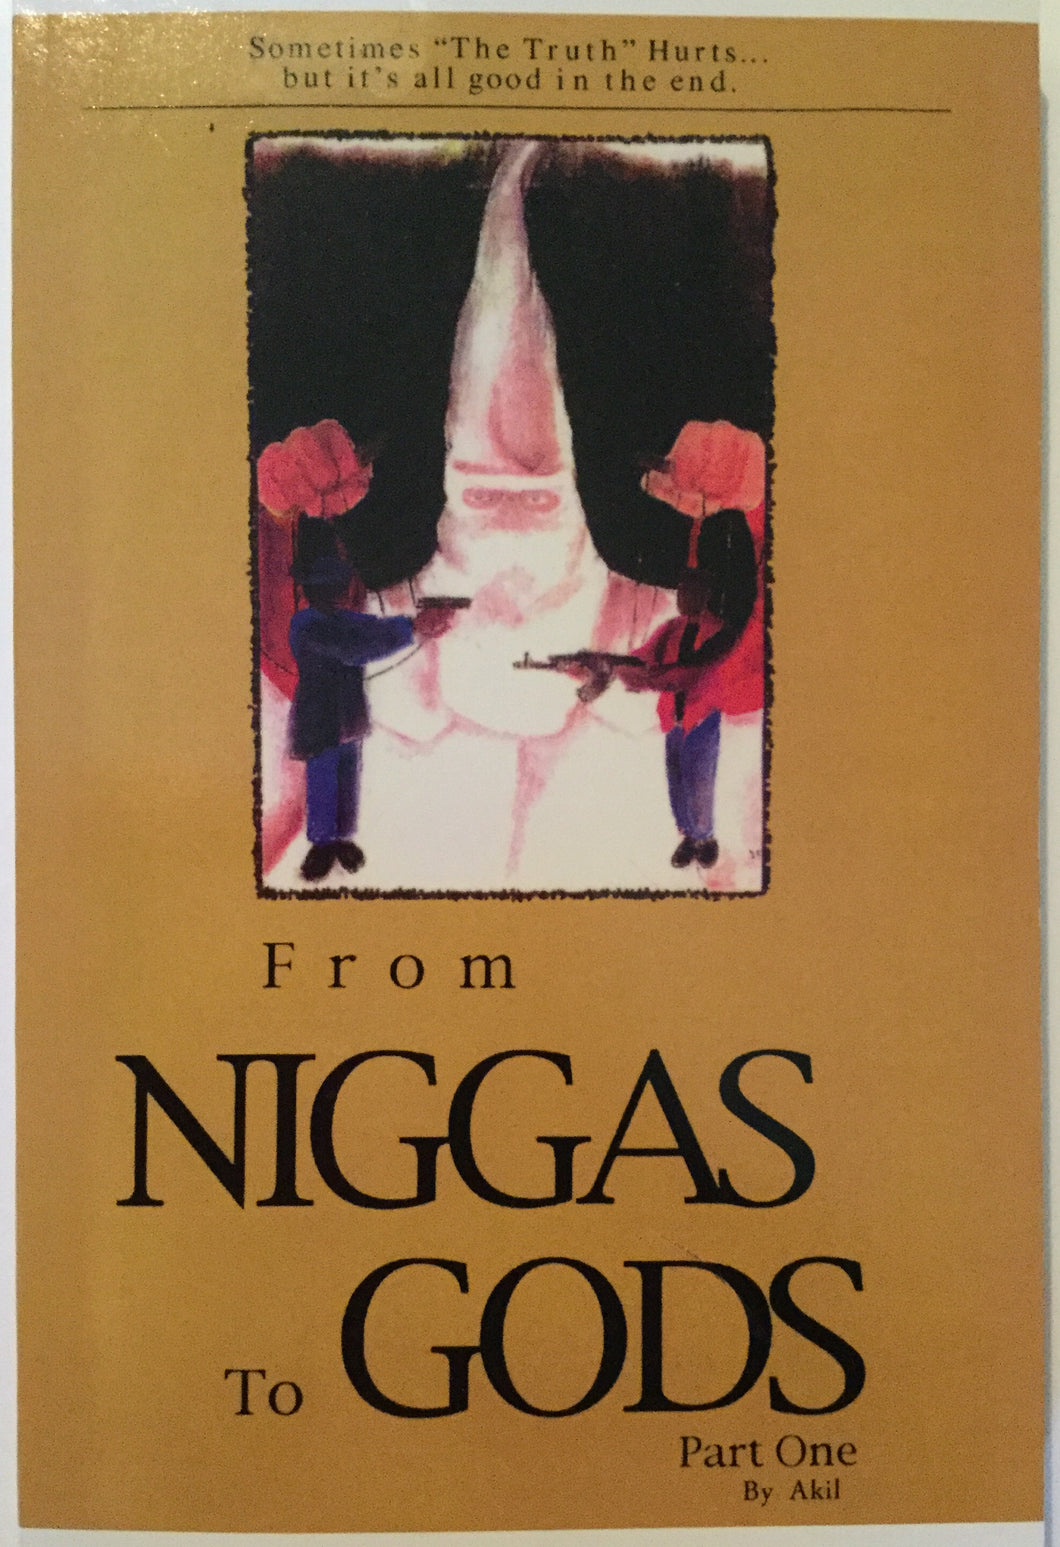 From Niggas to gods Part  One by Akil